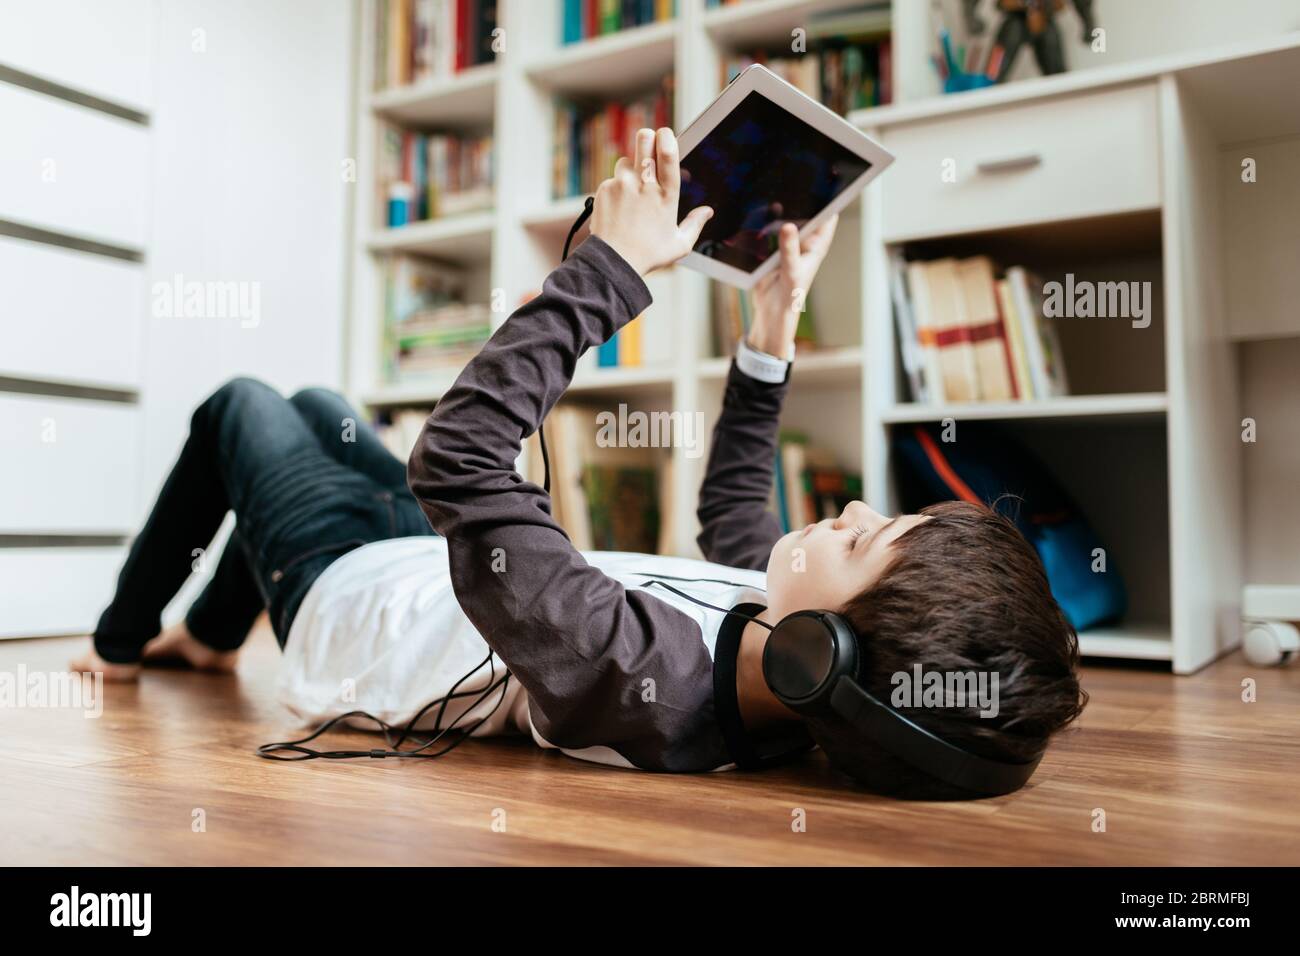 Teenage boy wearing headphones lying on the floor playing game on tablet at home. Boy relaxing by playing online game on digital tablet. Stock Photo